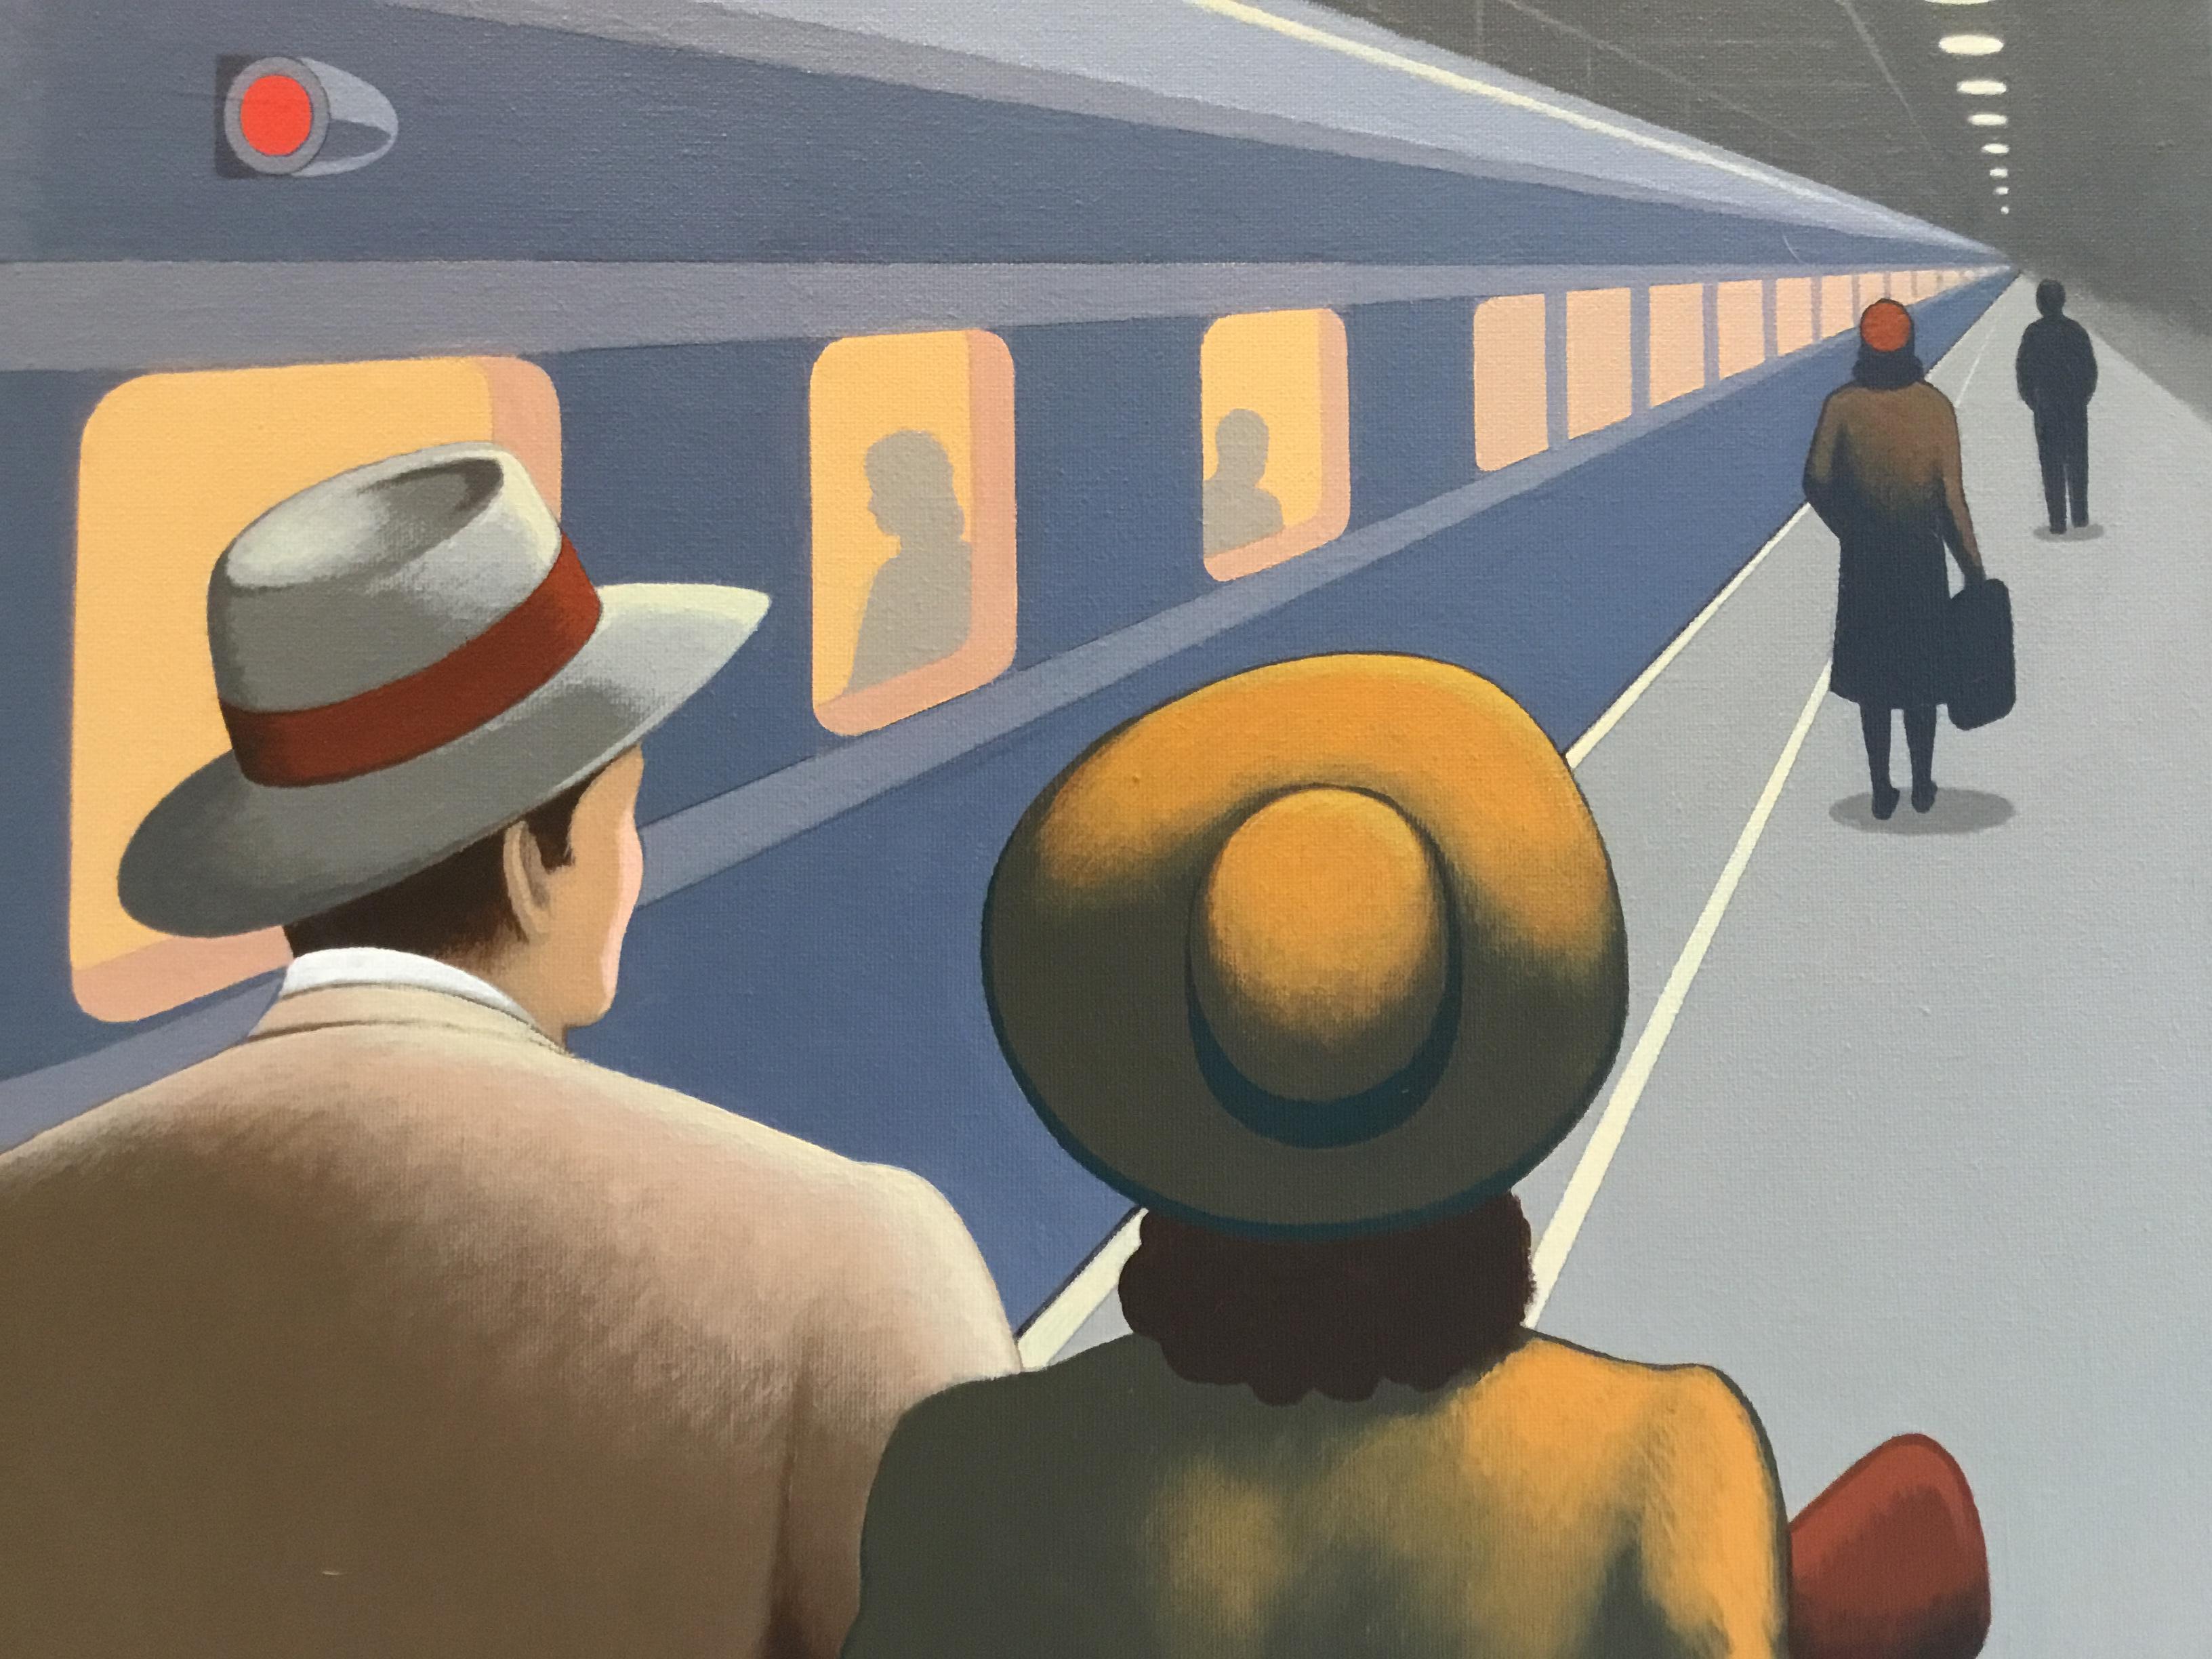 All Aboard
Original painting by Lynn Curlee
This painting was used as an illustration in trains, a picture book for older kids published by Simon & Schuster in 2009.
Mr Curlee is author/illustrator of many award winning books for